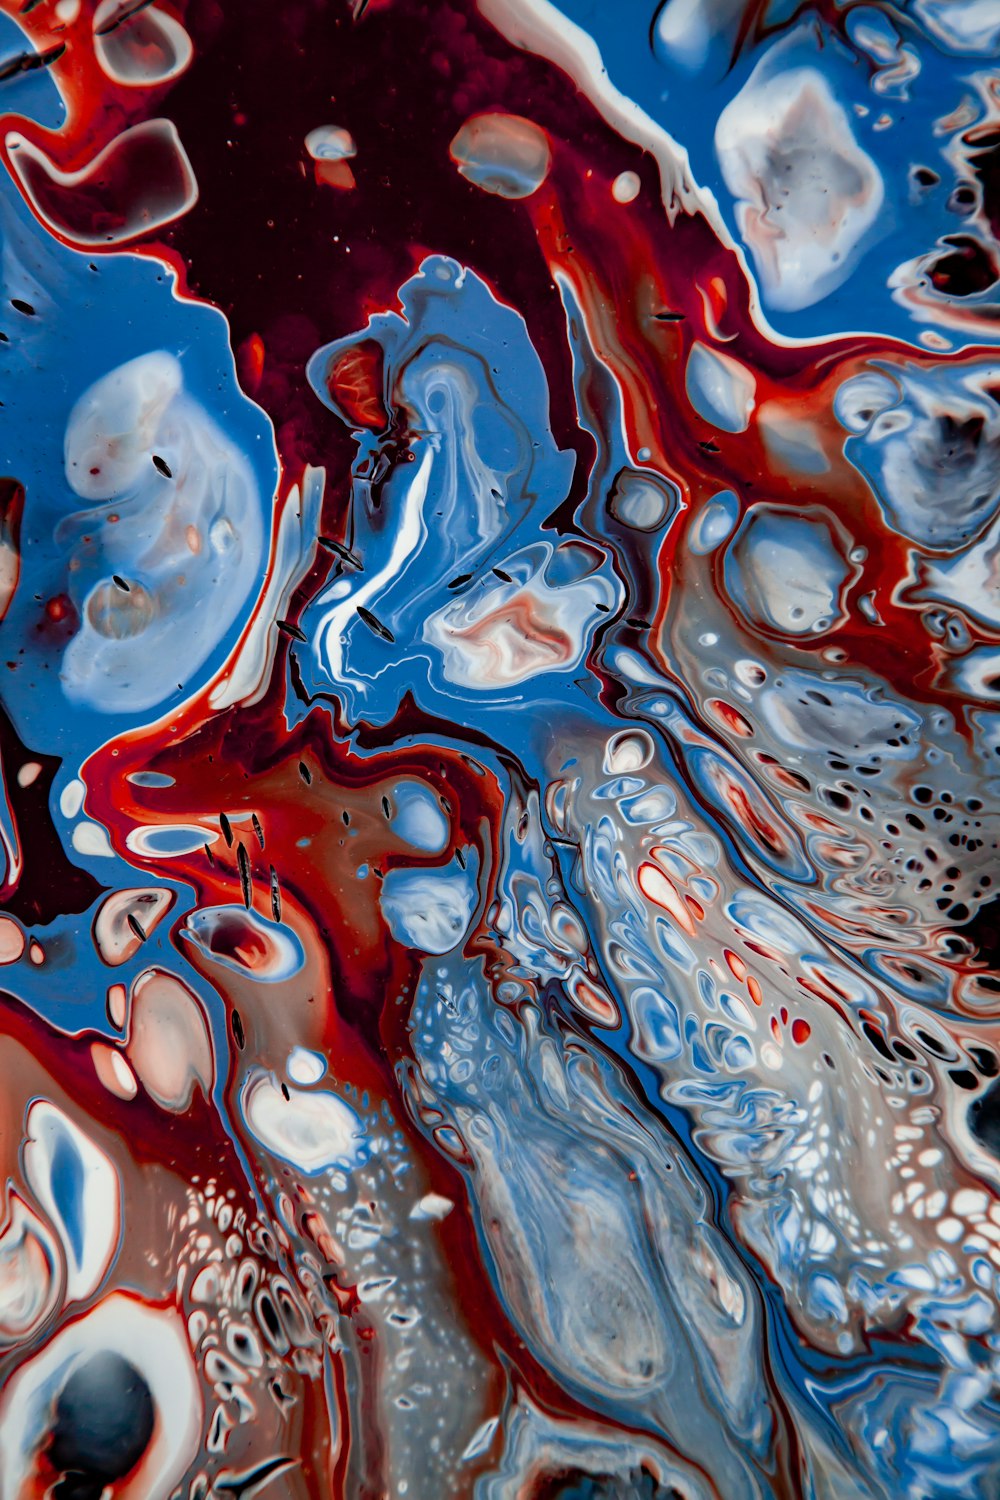 a close up of a red, white and blue liquid